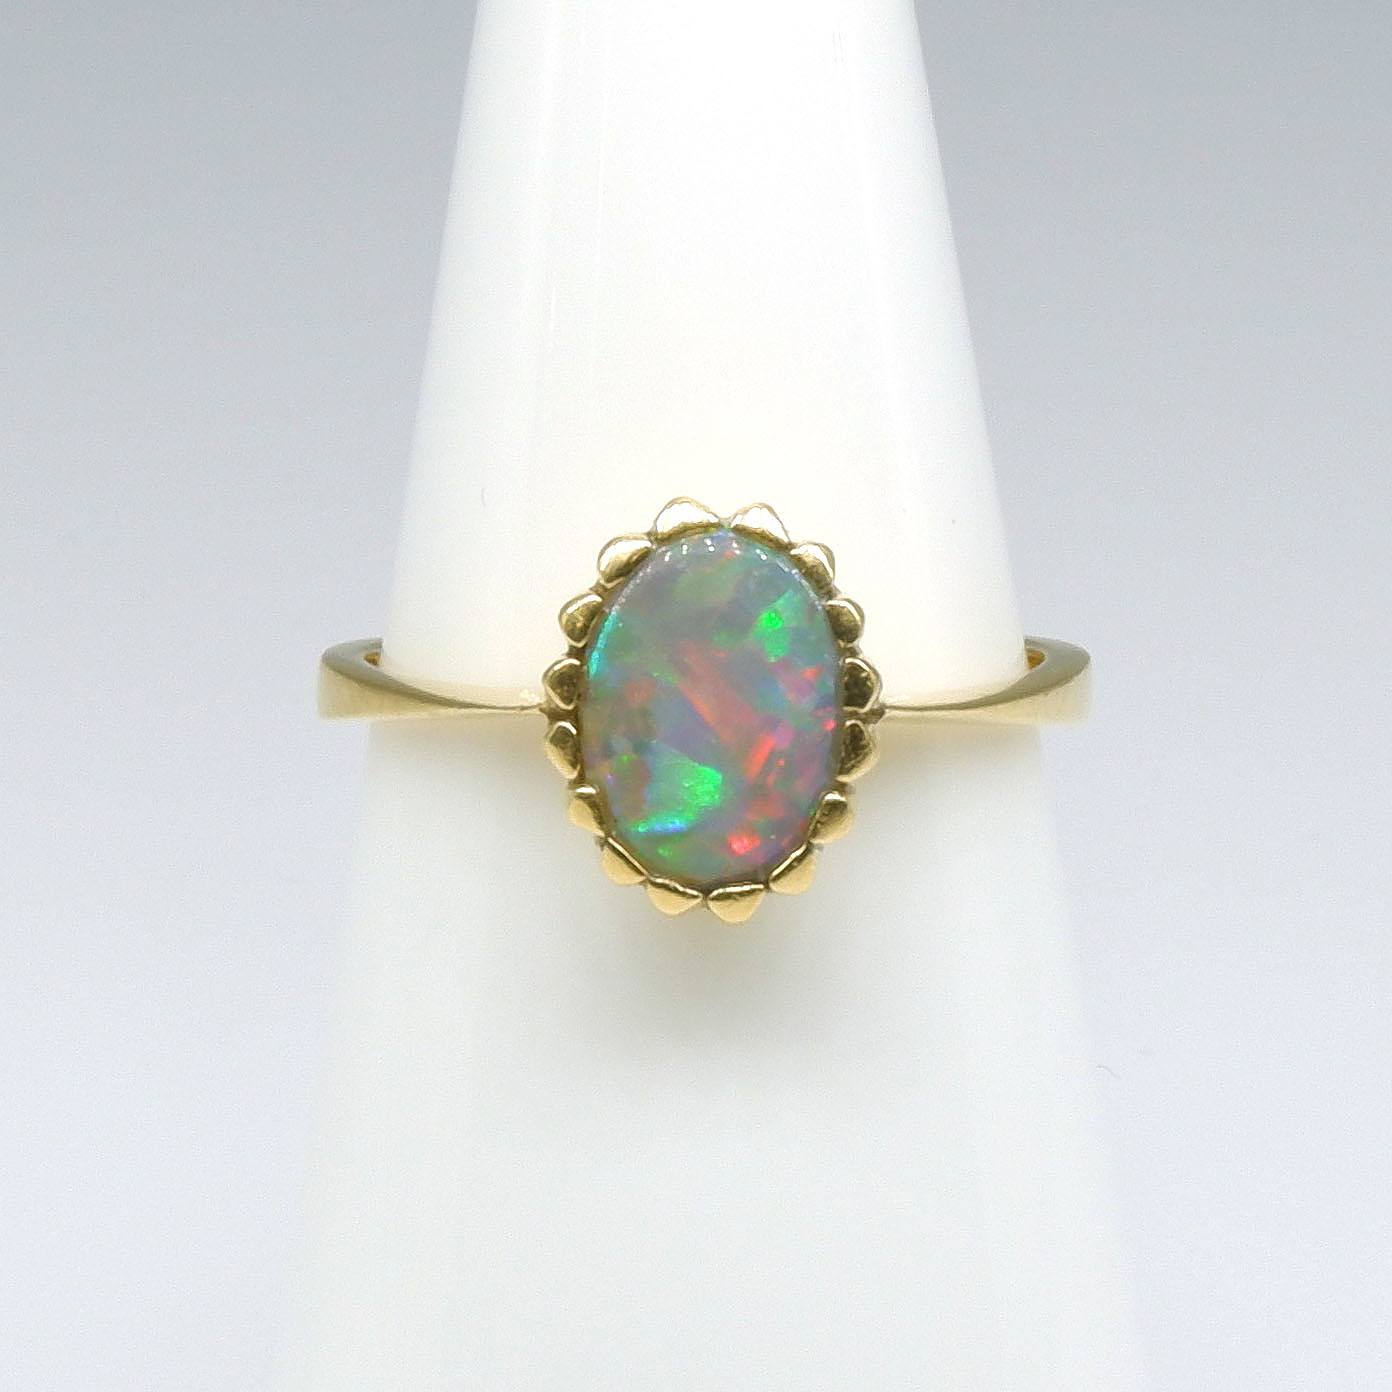 '18ct Yellow Gold Solid Dark Opal Ring with Good Play of Colour, Including Red'